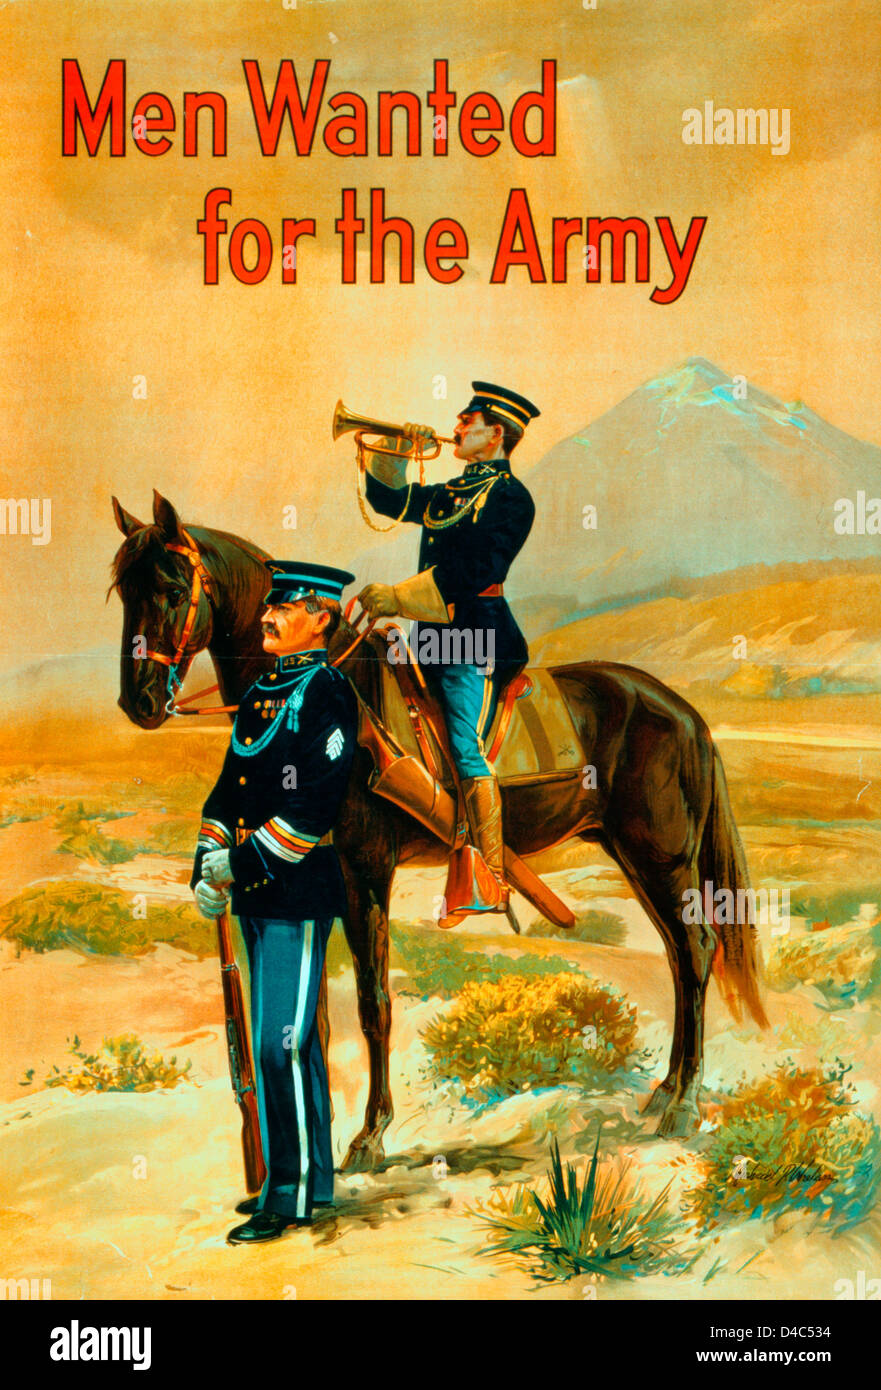 Men wanted for the army - U.S. Army recruiting poster showing an officer standing with a soldier, seated on a horse, blowing a bugle, circa 1917 Stock Photo